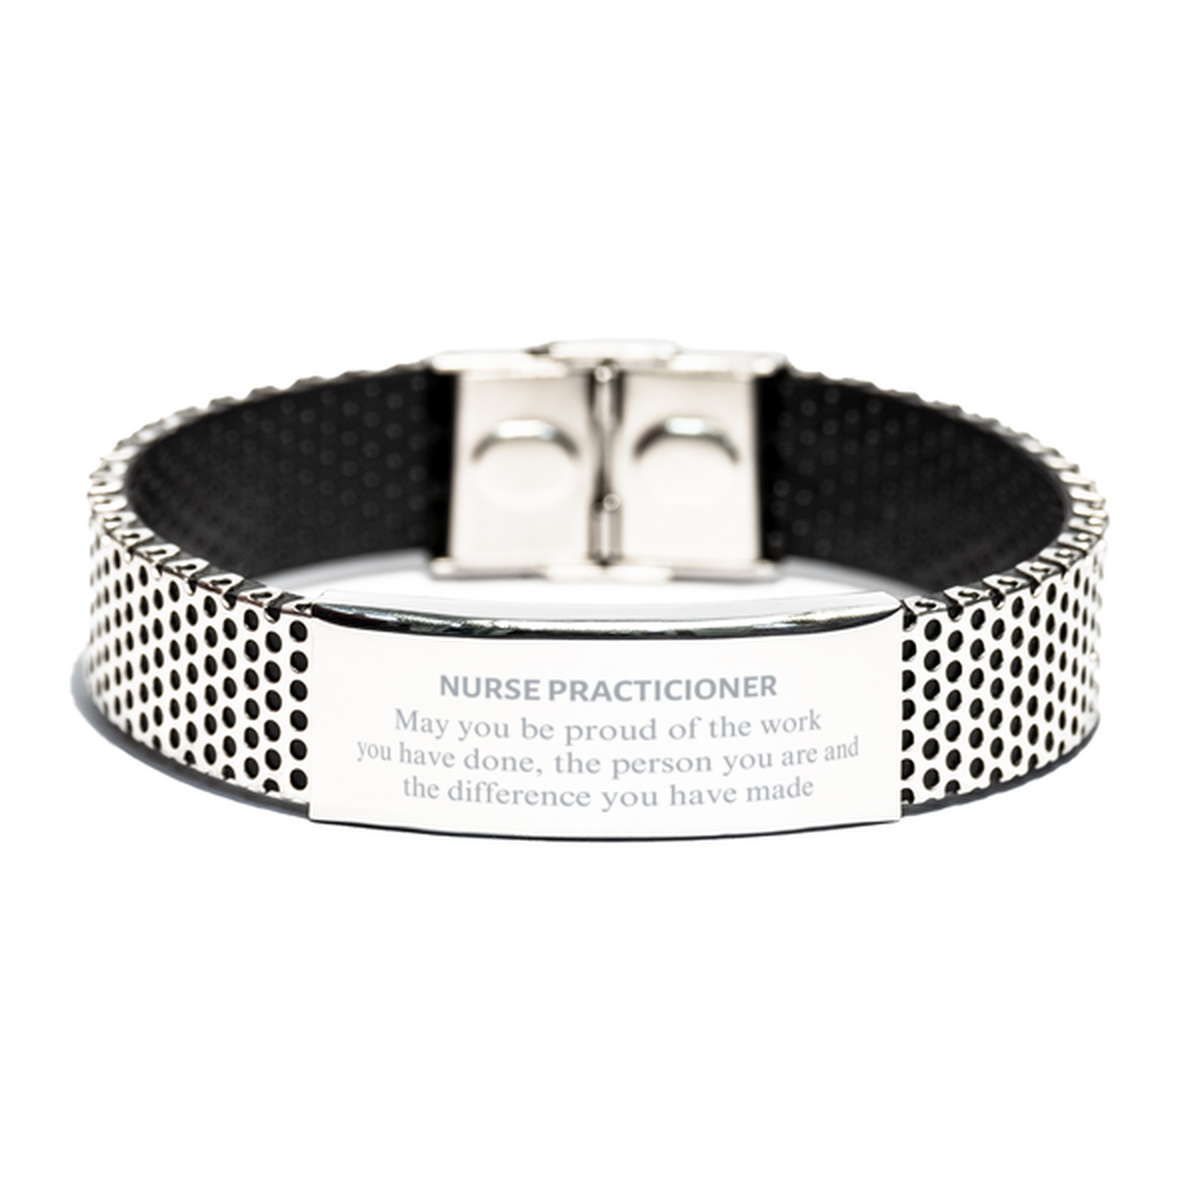 Nurse Practicioner May you be proud of the work you have done, Retirement Nurse Practicioner Stainless Steel Bracelet for Colleague Appreciation Gifts Amazing for Nurse Practicioner